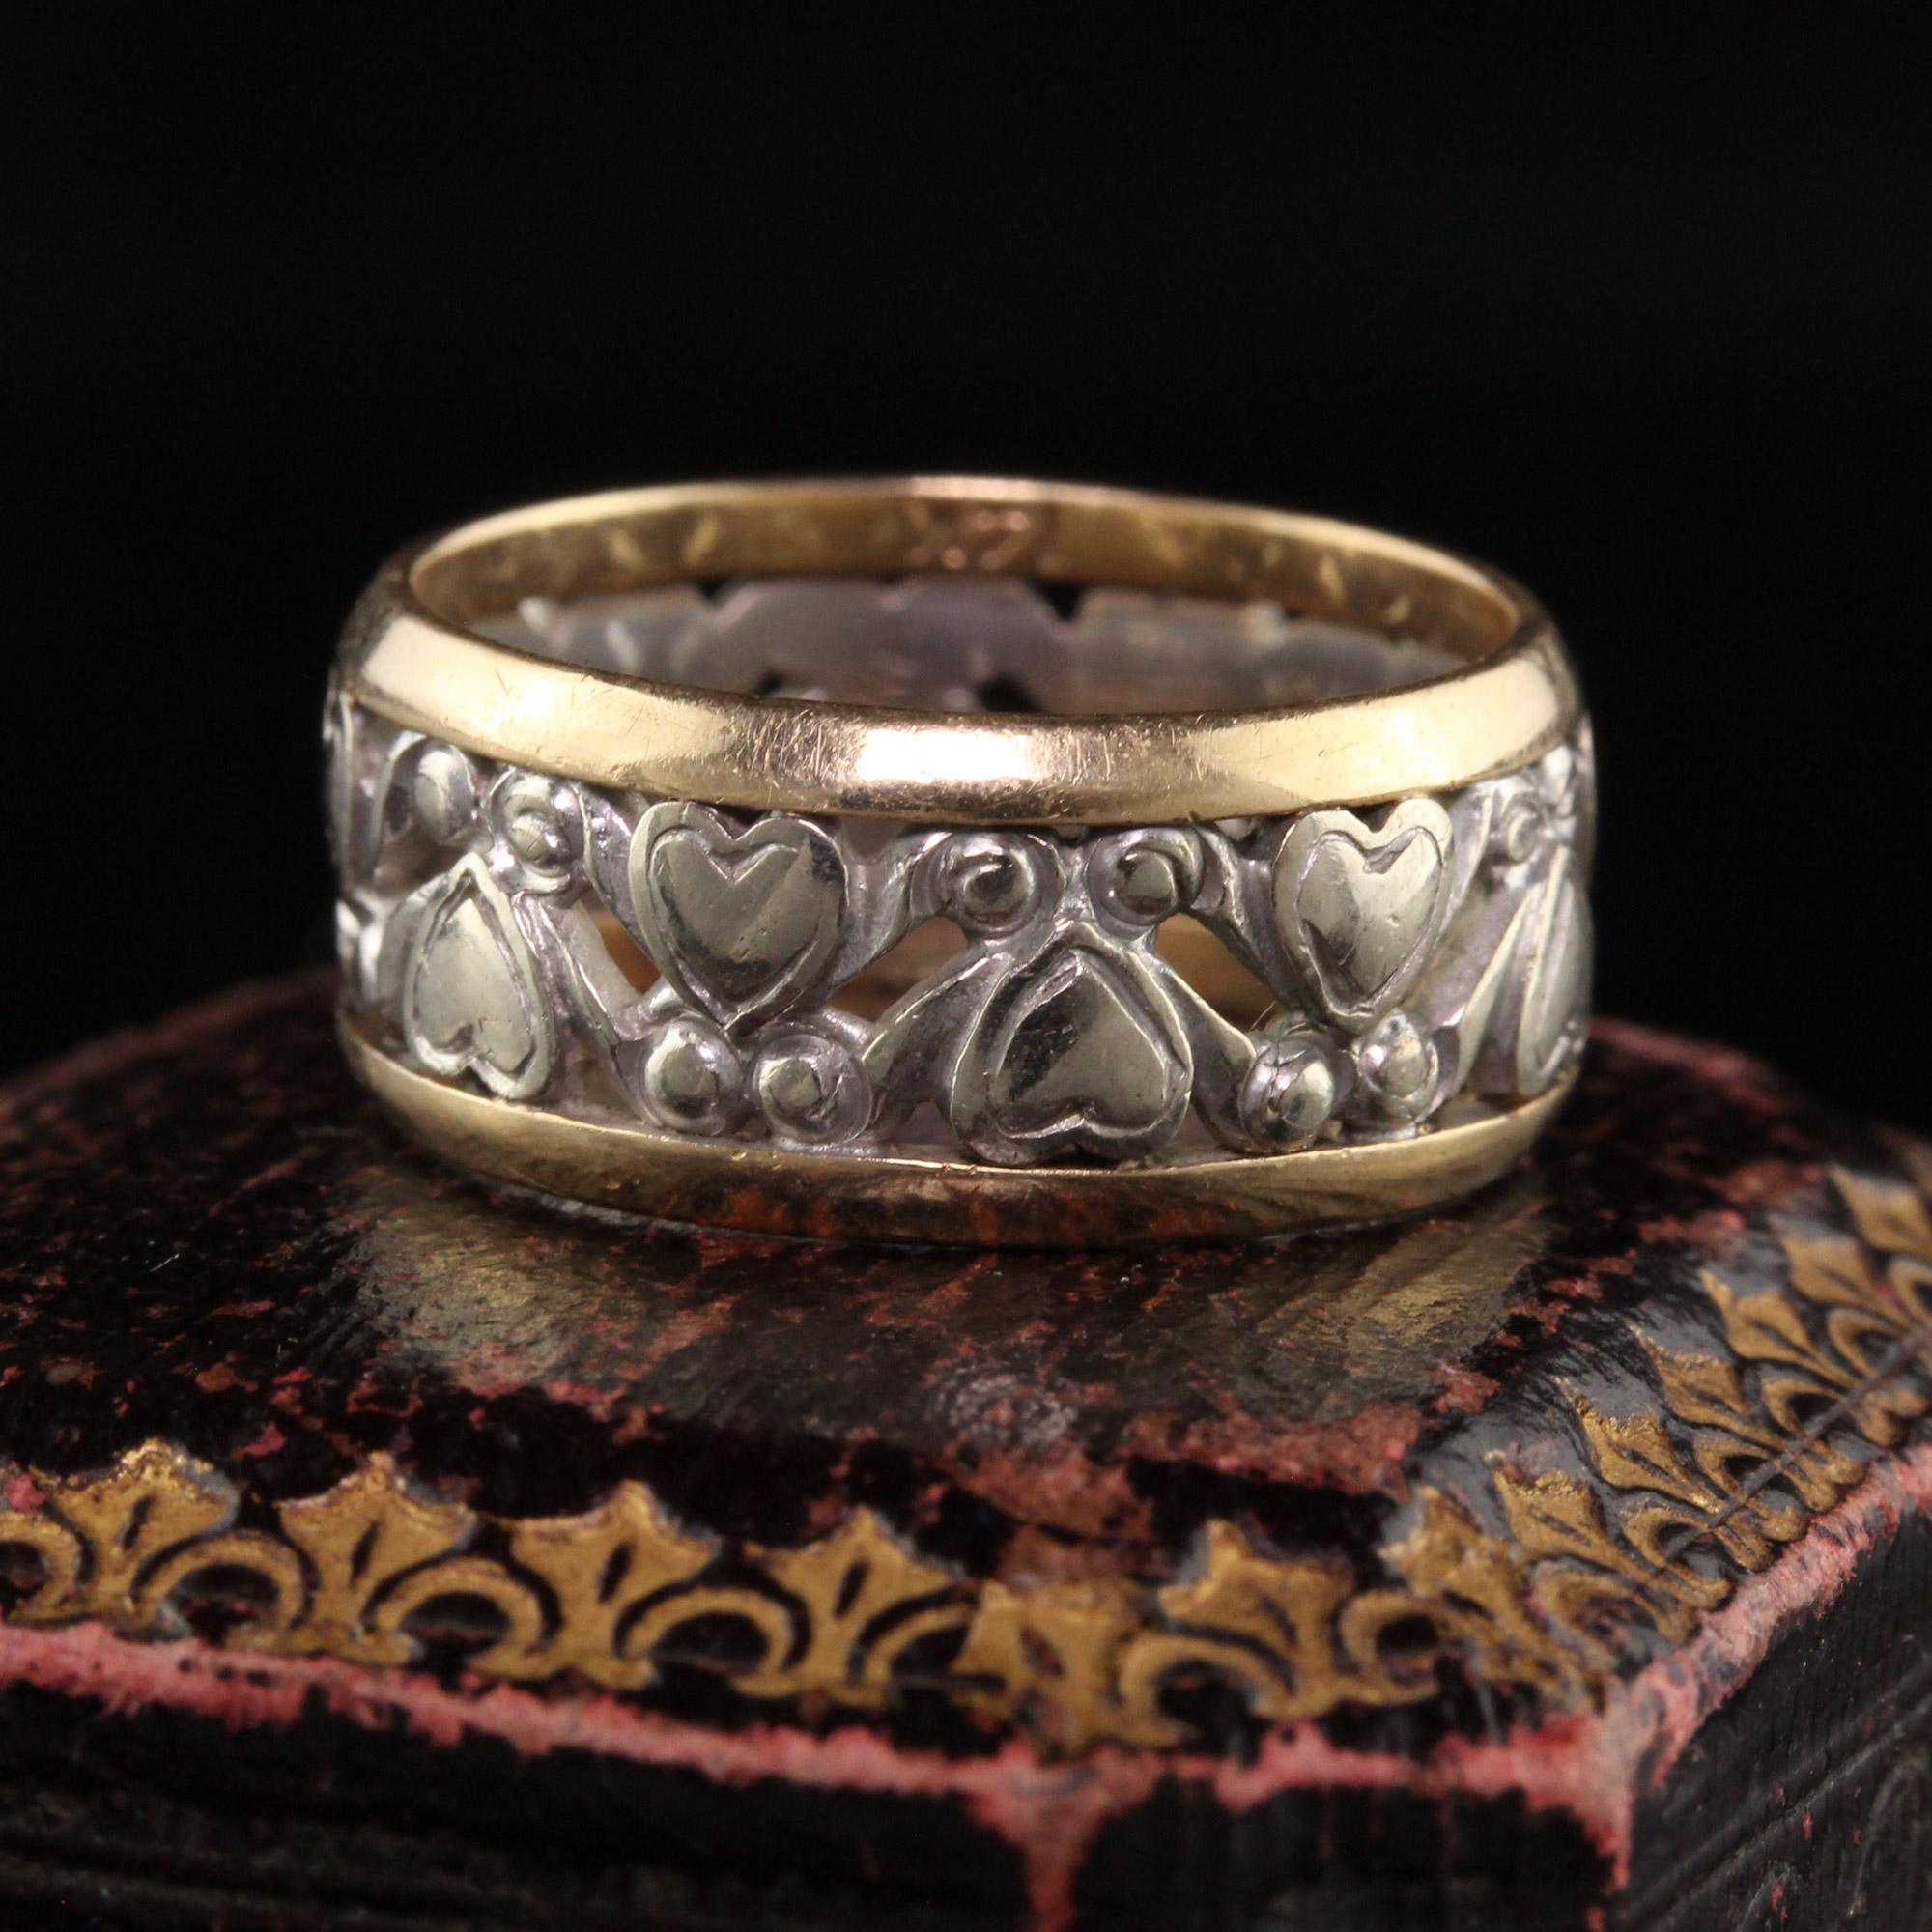 Beautiful Antique Art Deco 14K White and Yellow Gold Wide Heart Wedding Band. This beautiful wedding band has hearts carved out of white gold in the center and yellow gold sides. It is a very unique ring.

Item #R1153

Metal: 14K White and Yellow